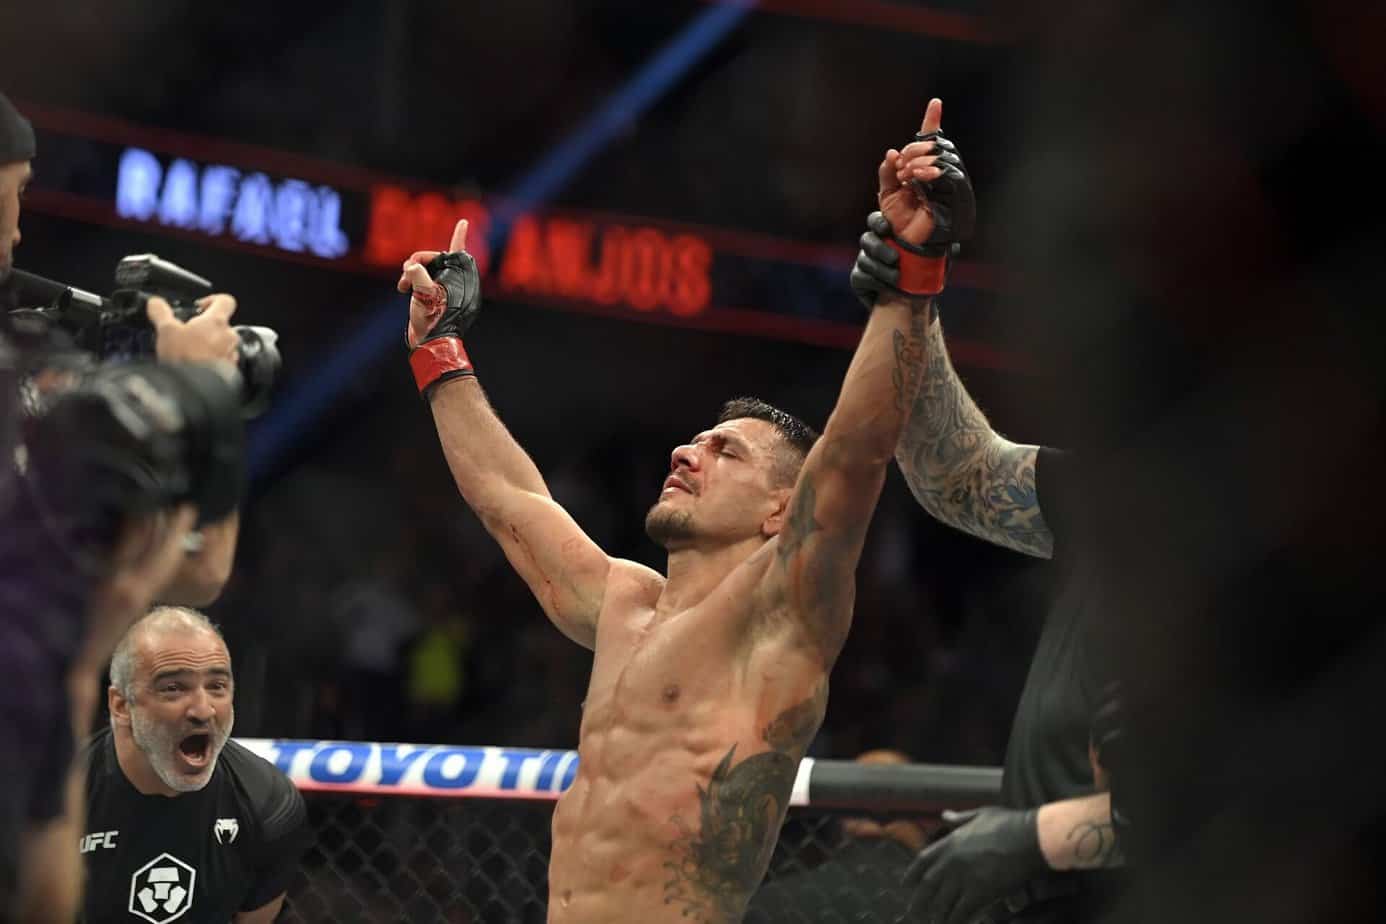 UFC Fight Night: Luque vs. Dos Anjos Fight Card Odds and Picks